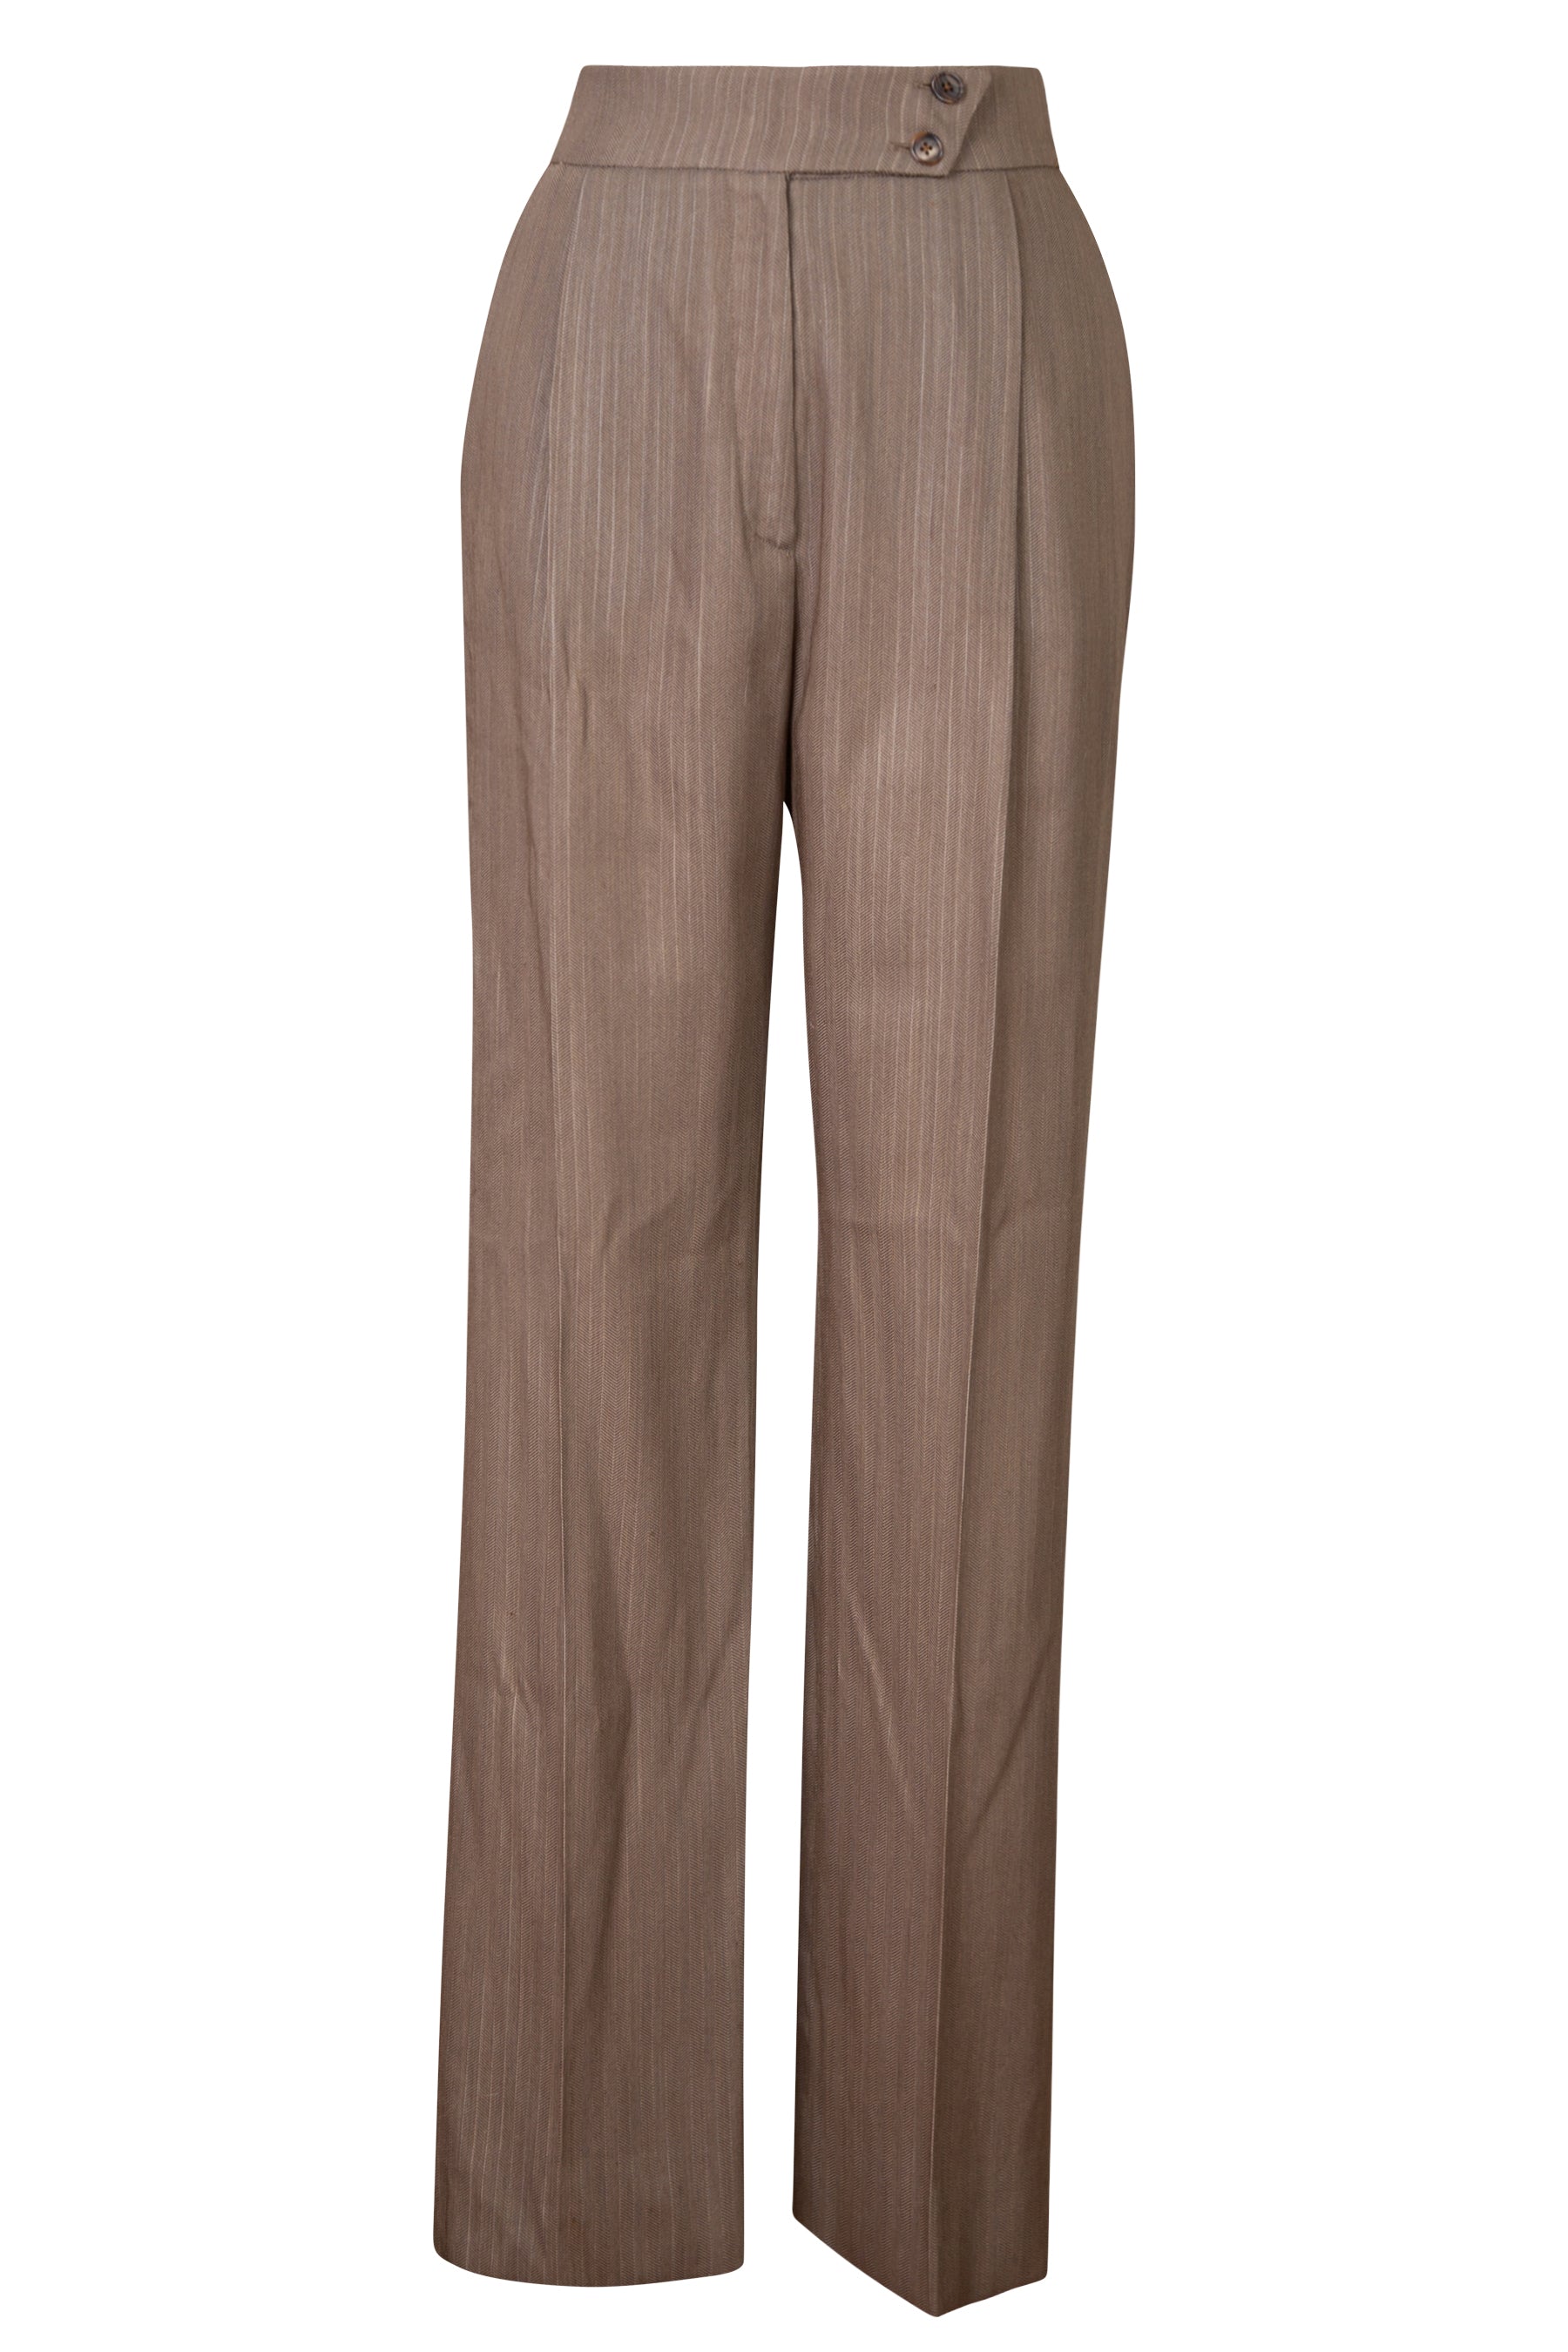 Single-pleat lounge pants in neutrals - Tom Ford | Mytheresa